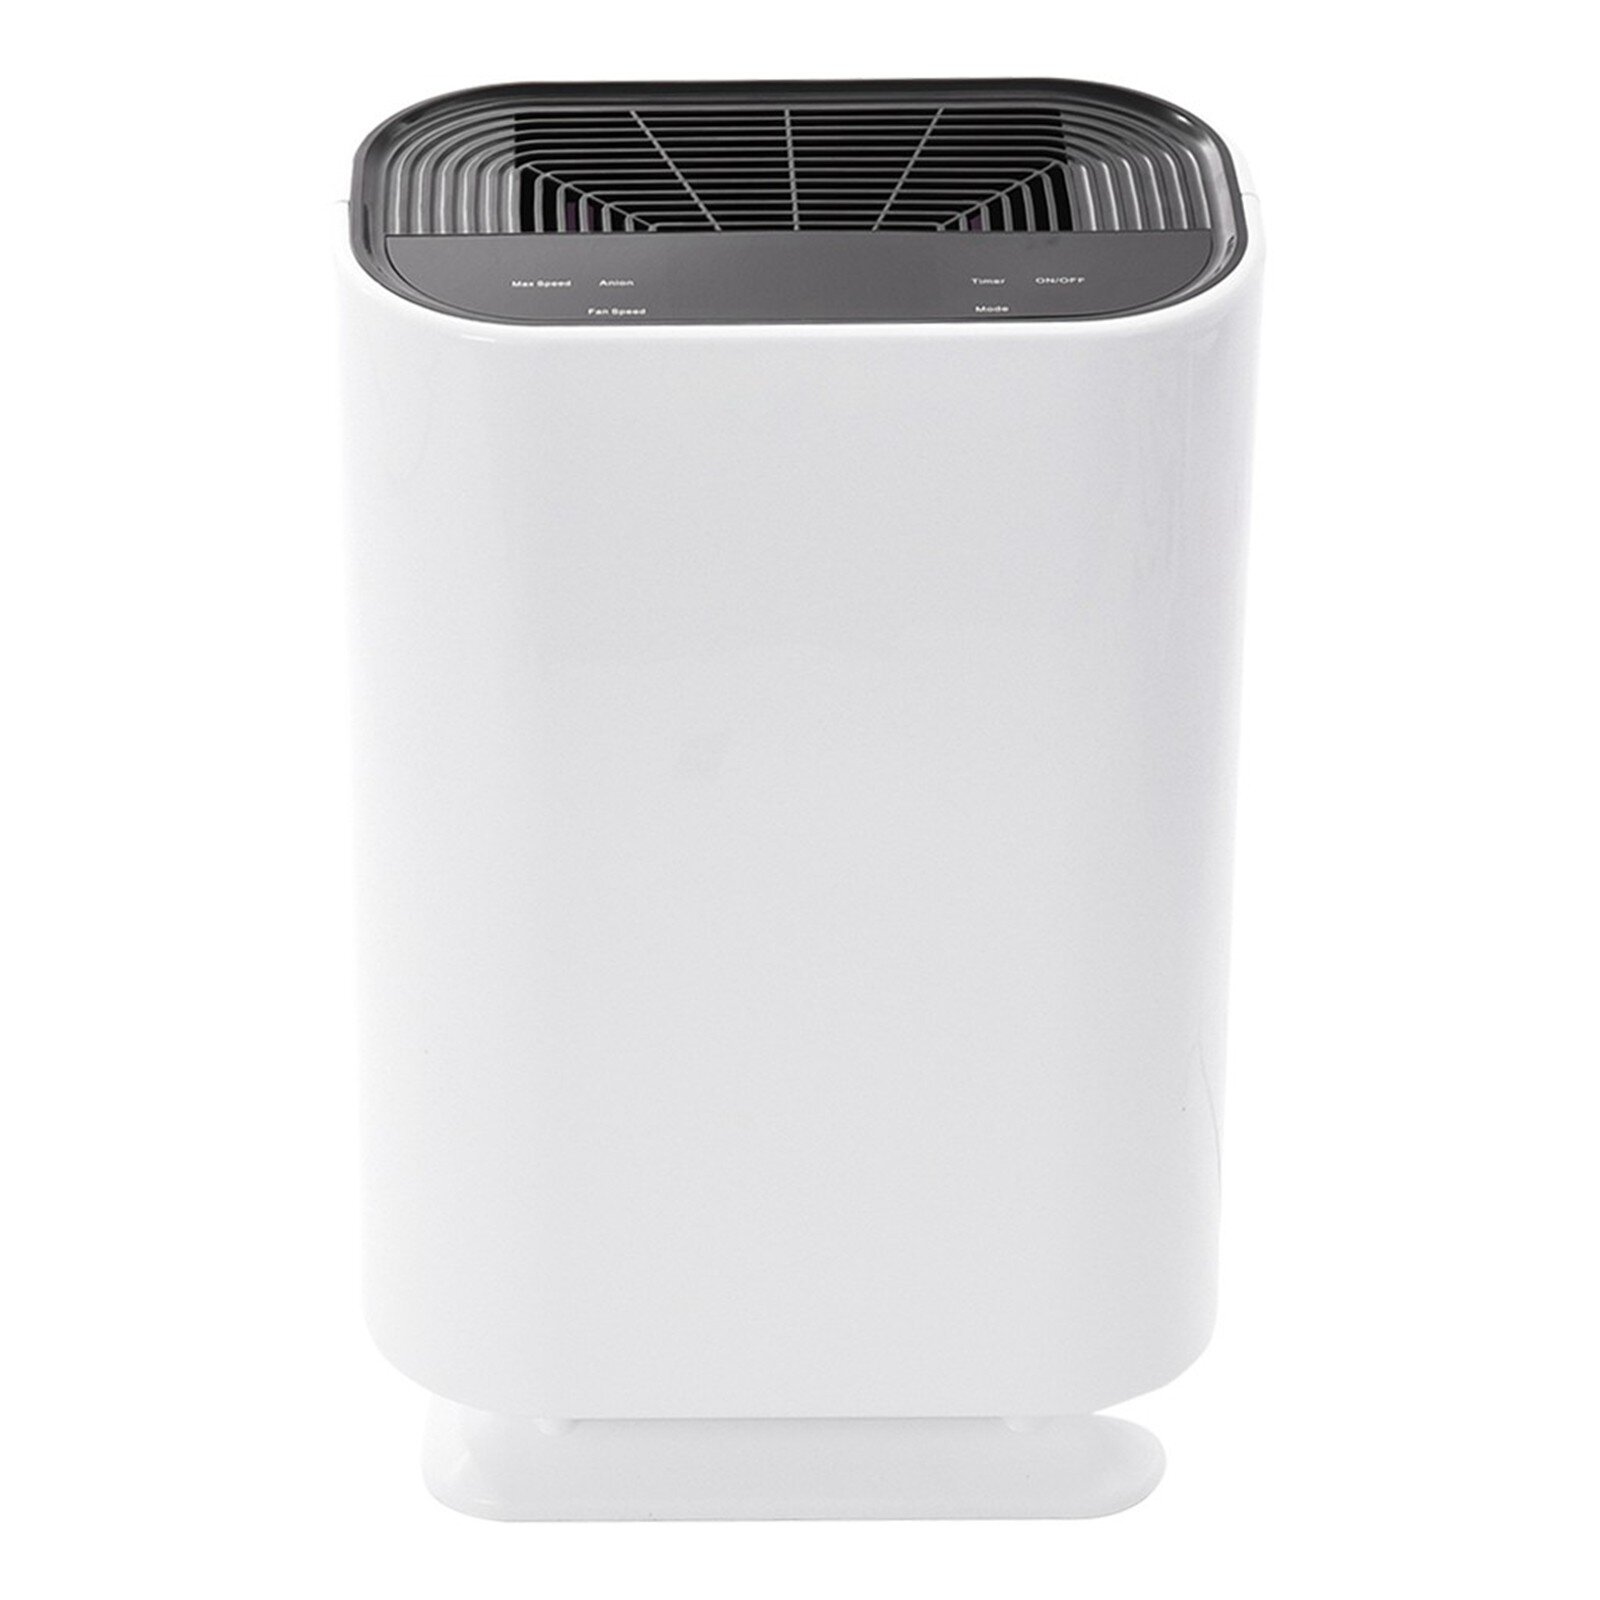 Air Purifier Home Air Cleaner Lonizer Carbon Filter Remove Odor Dust Mold 